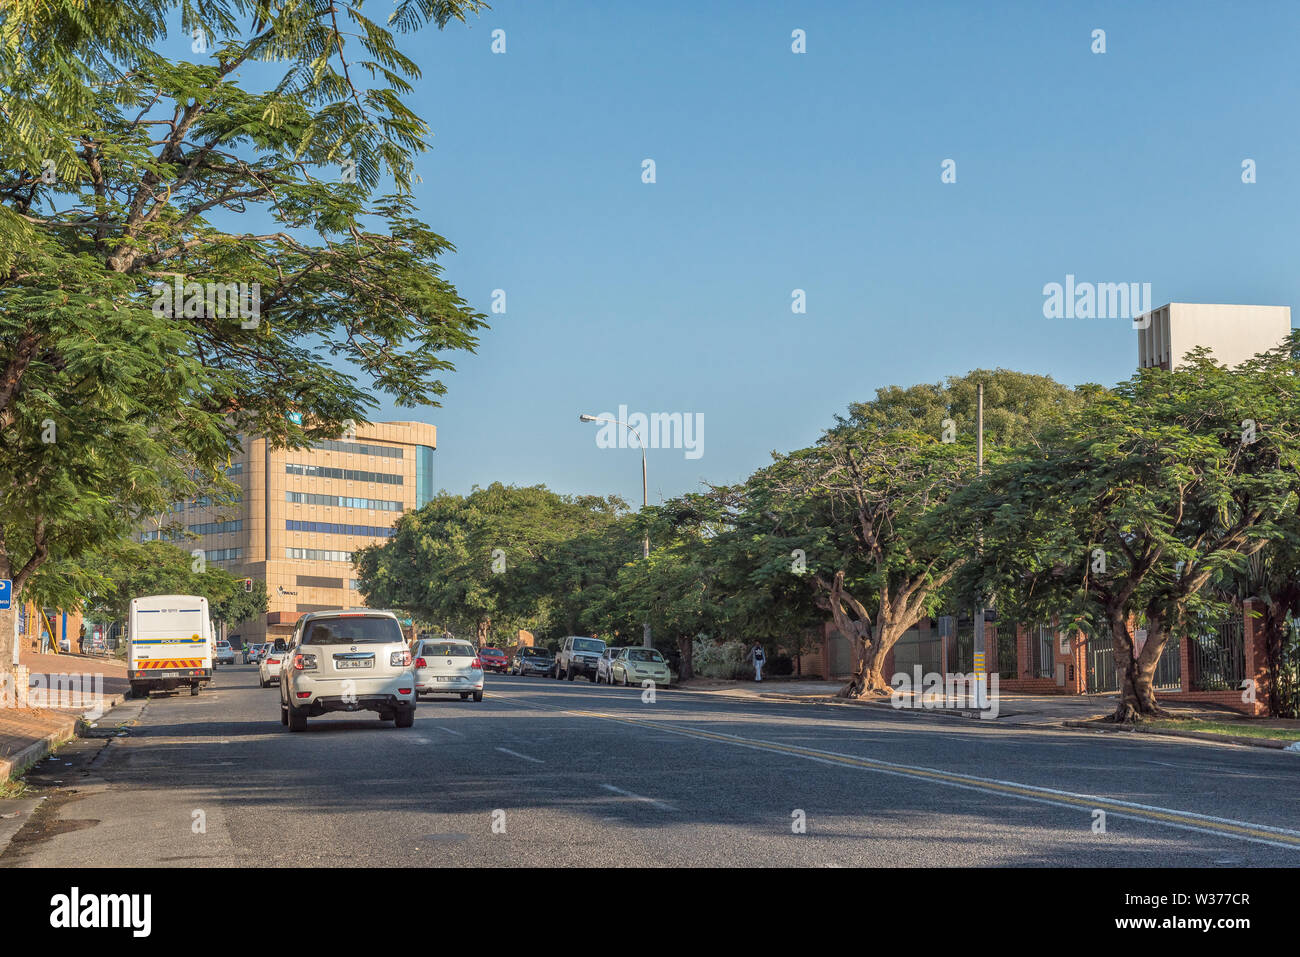 NELSPRUIT, SOUTH AFRICA - MAY 3, 2019: A street scene, with buildings and vehicles, in Nelspruit, in the Mpumalanga Province Stock Photo